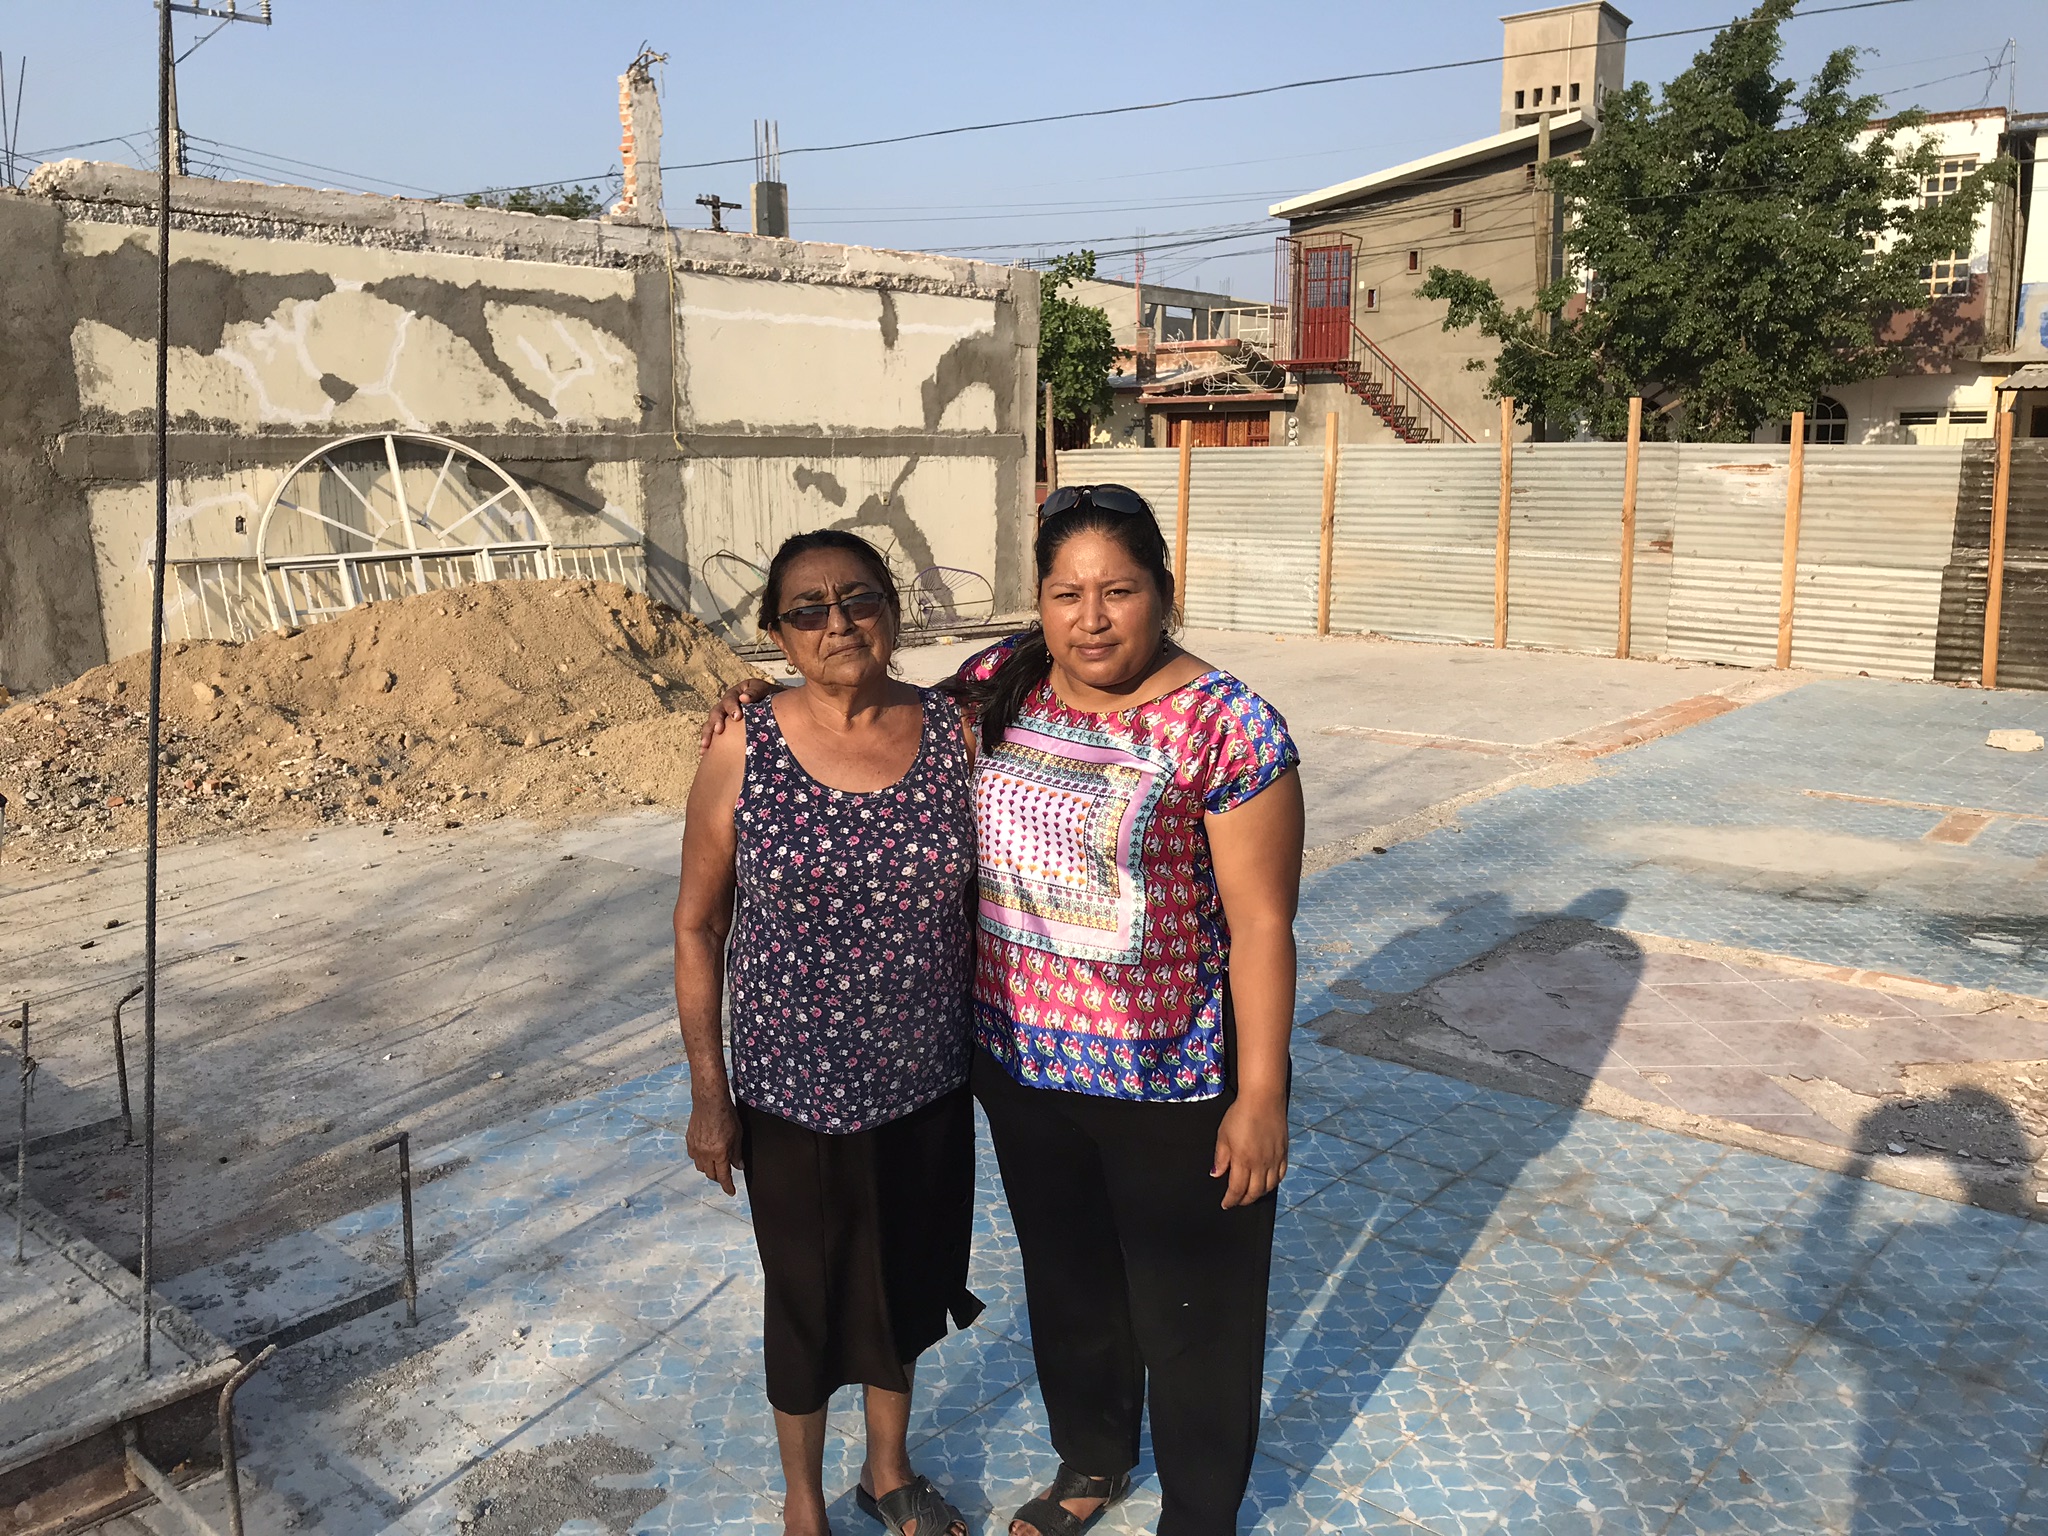 These two ladies, Alicia and Laura lost their home in the Earthquake. They are standing on the foundation of what once was Laura’s home.